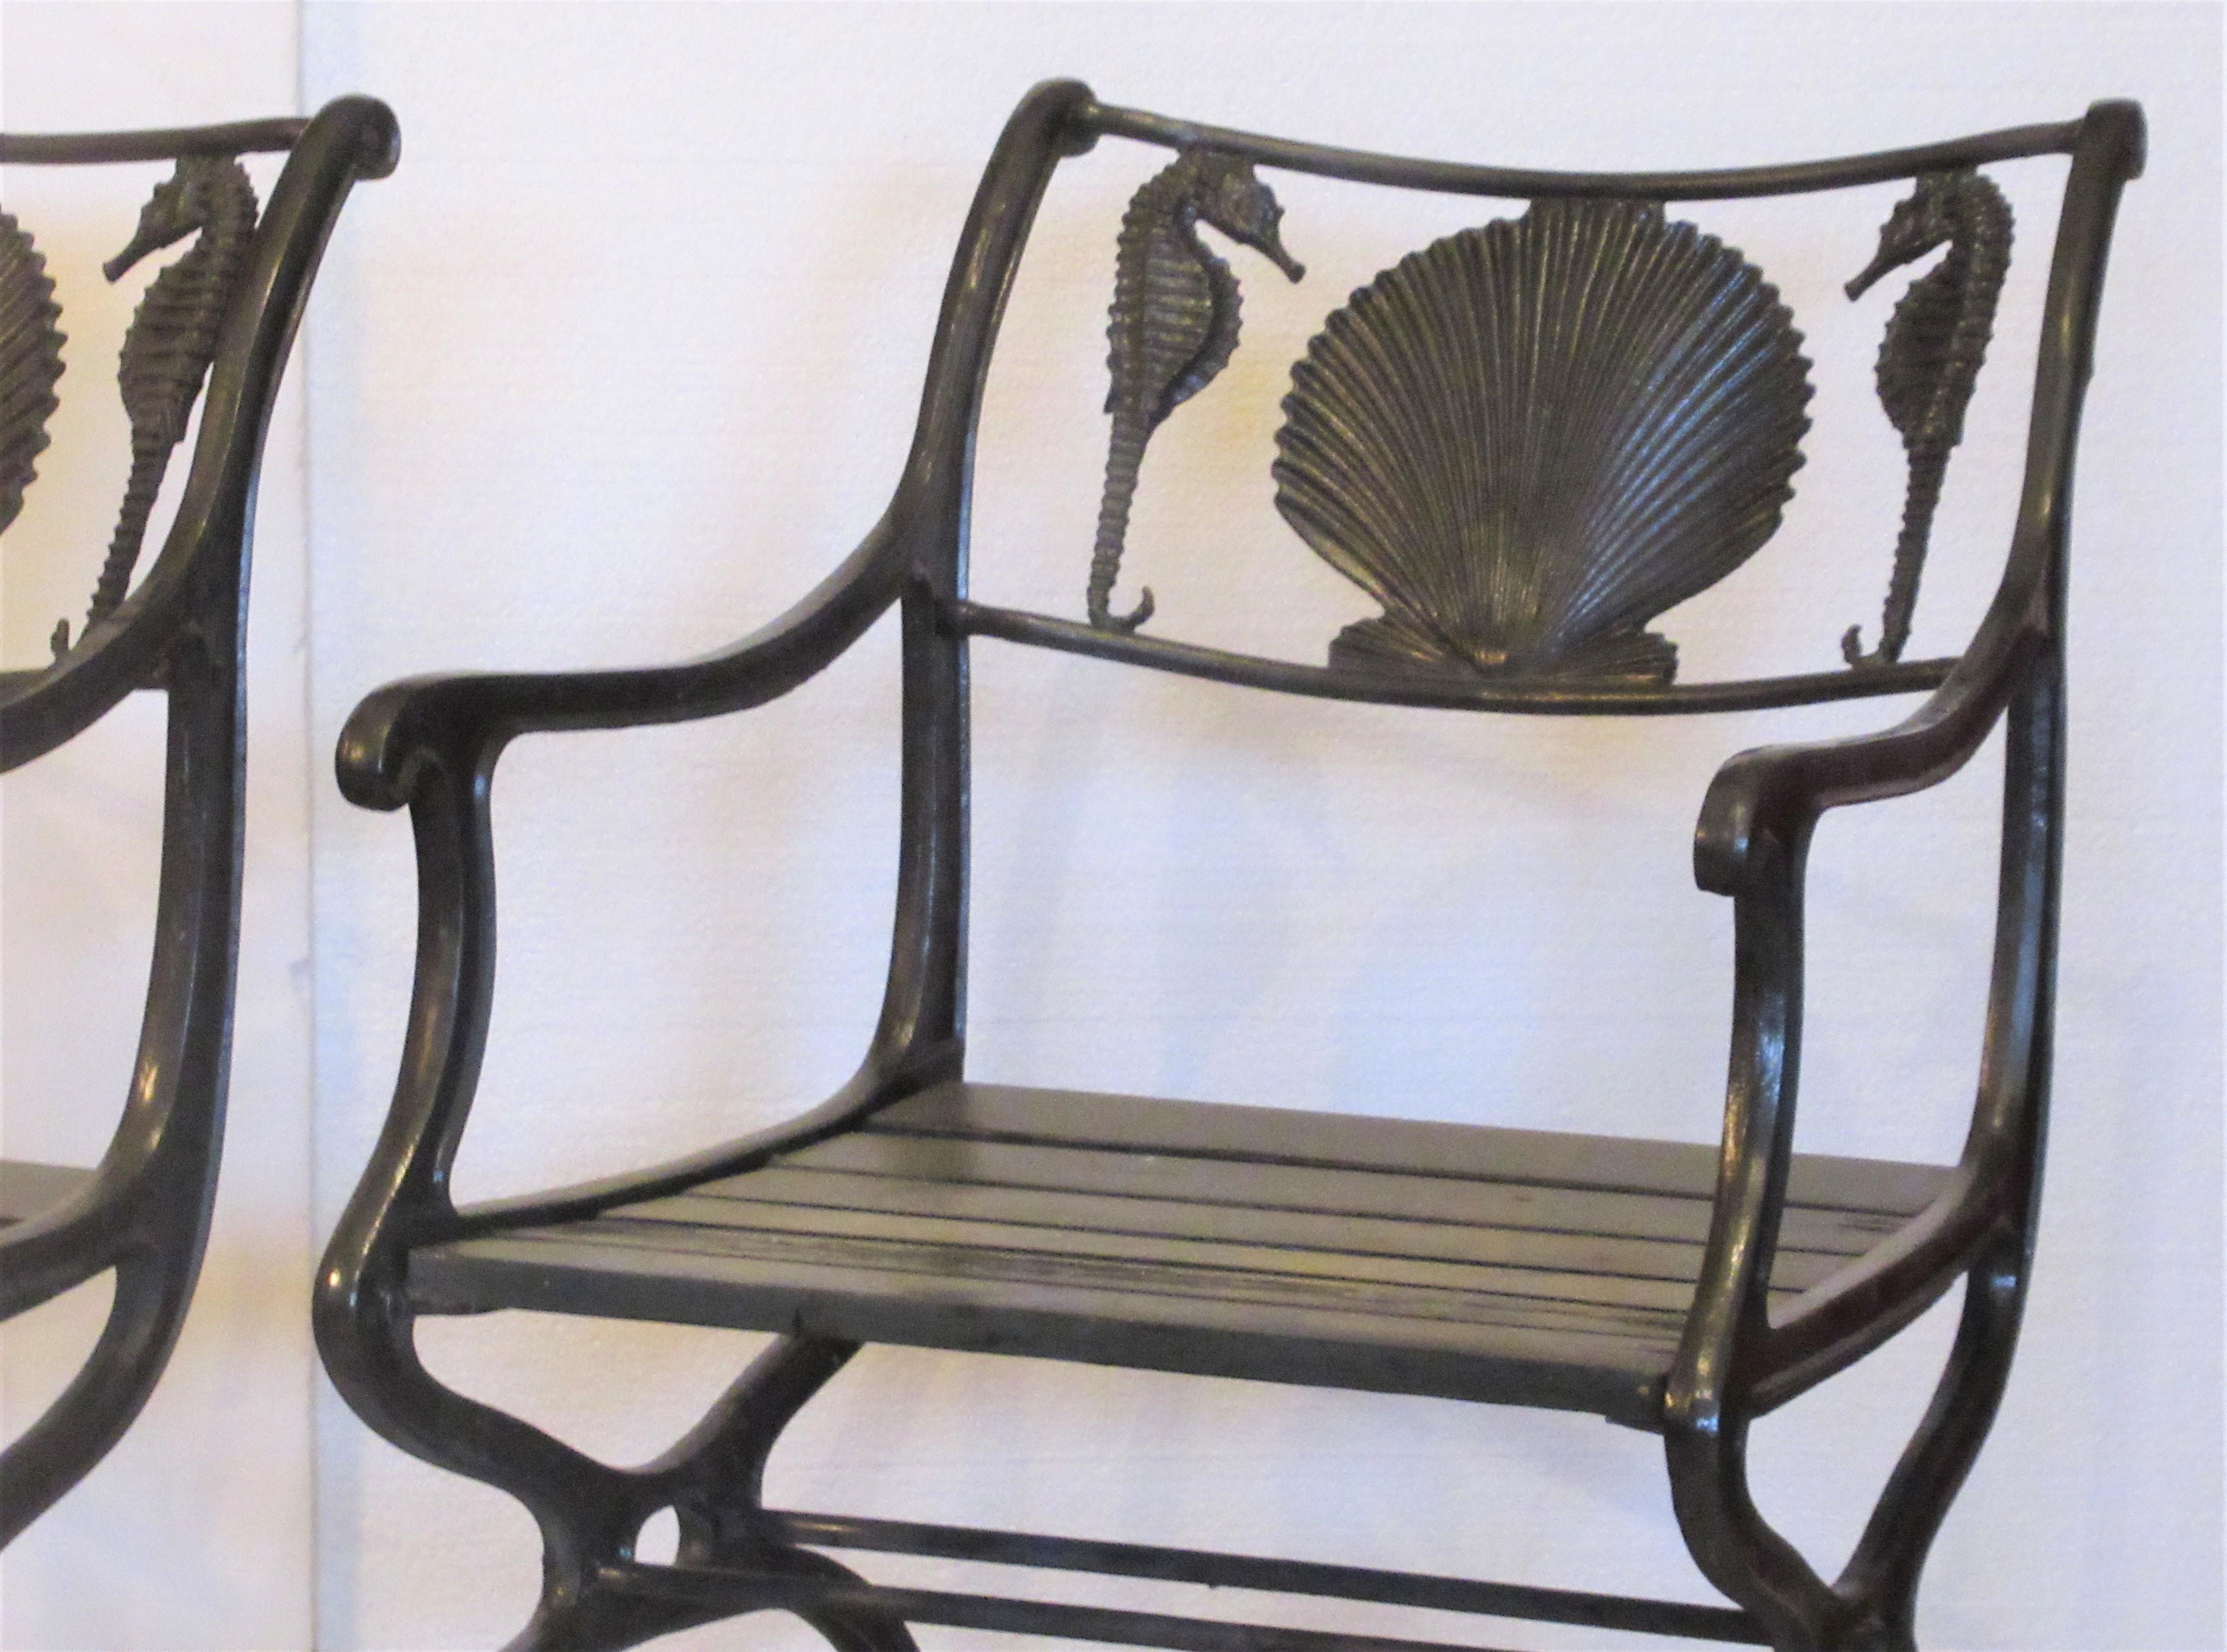 Antique American Cast Iron Sea Horse and Scallop Shell Design Garden Chairs 1